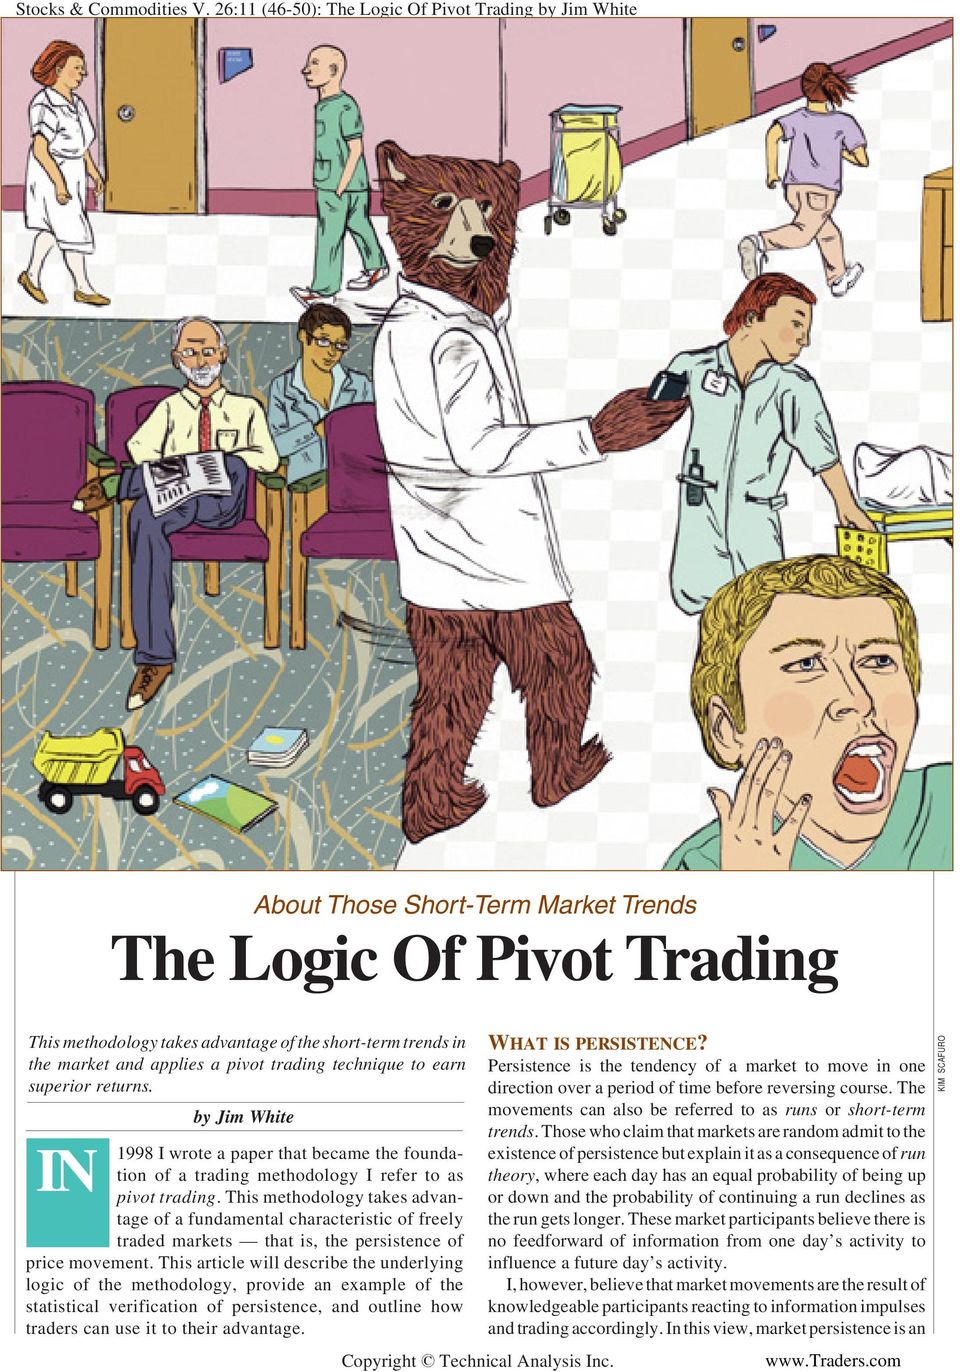 IN 998 I wrote a paper that became the foundation of a trading methodology I refer to as pivot trading.